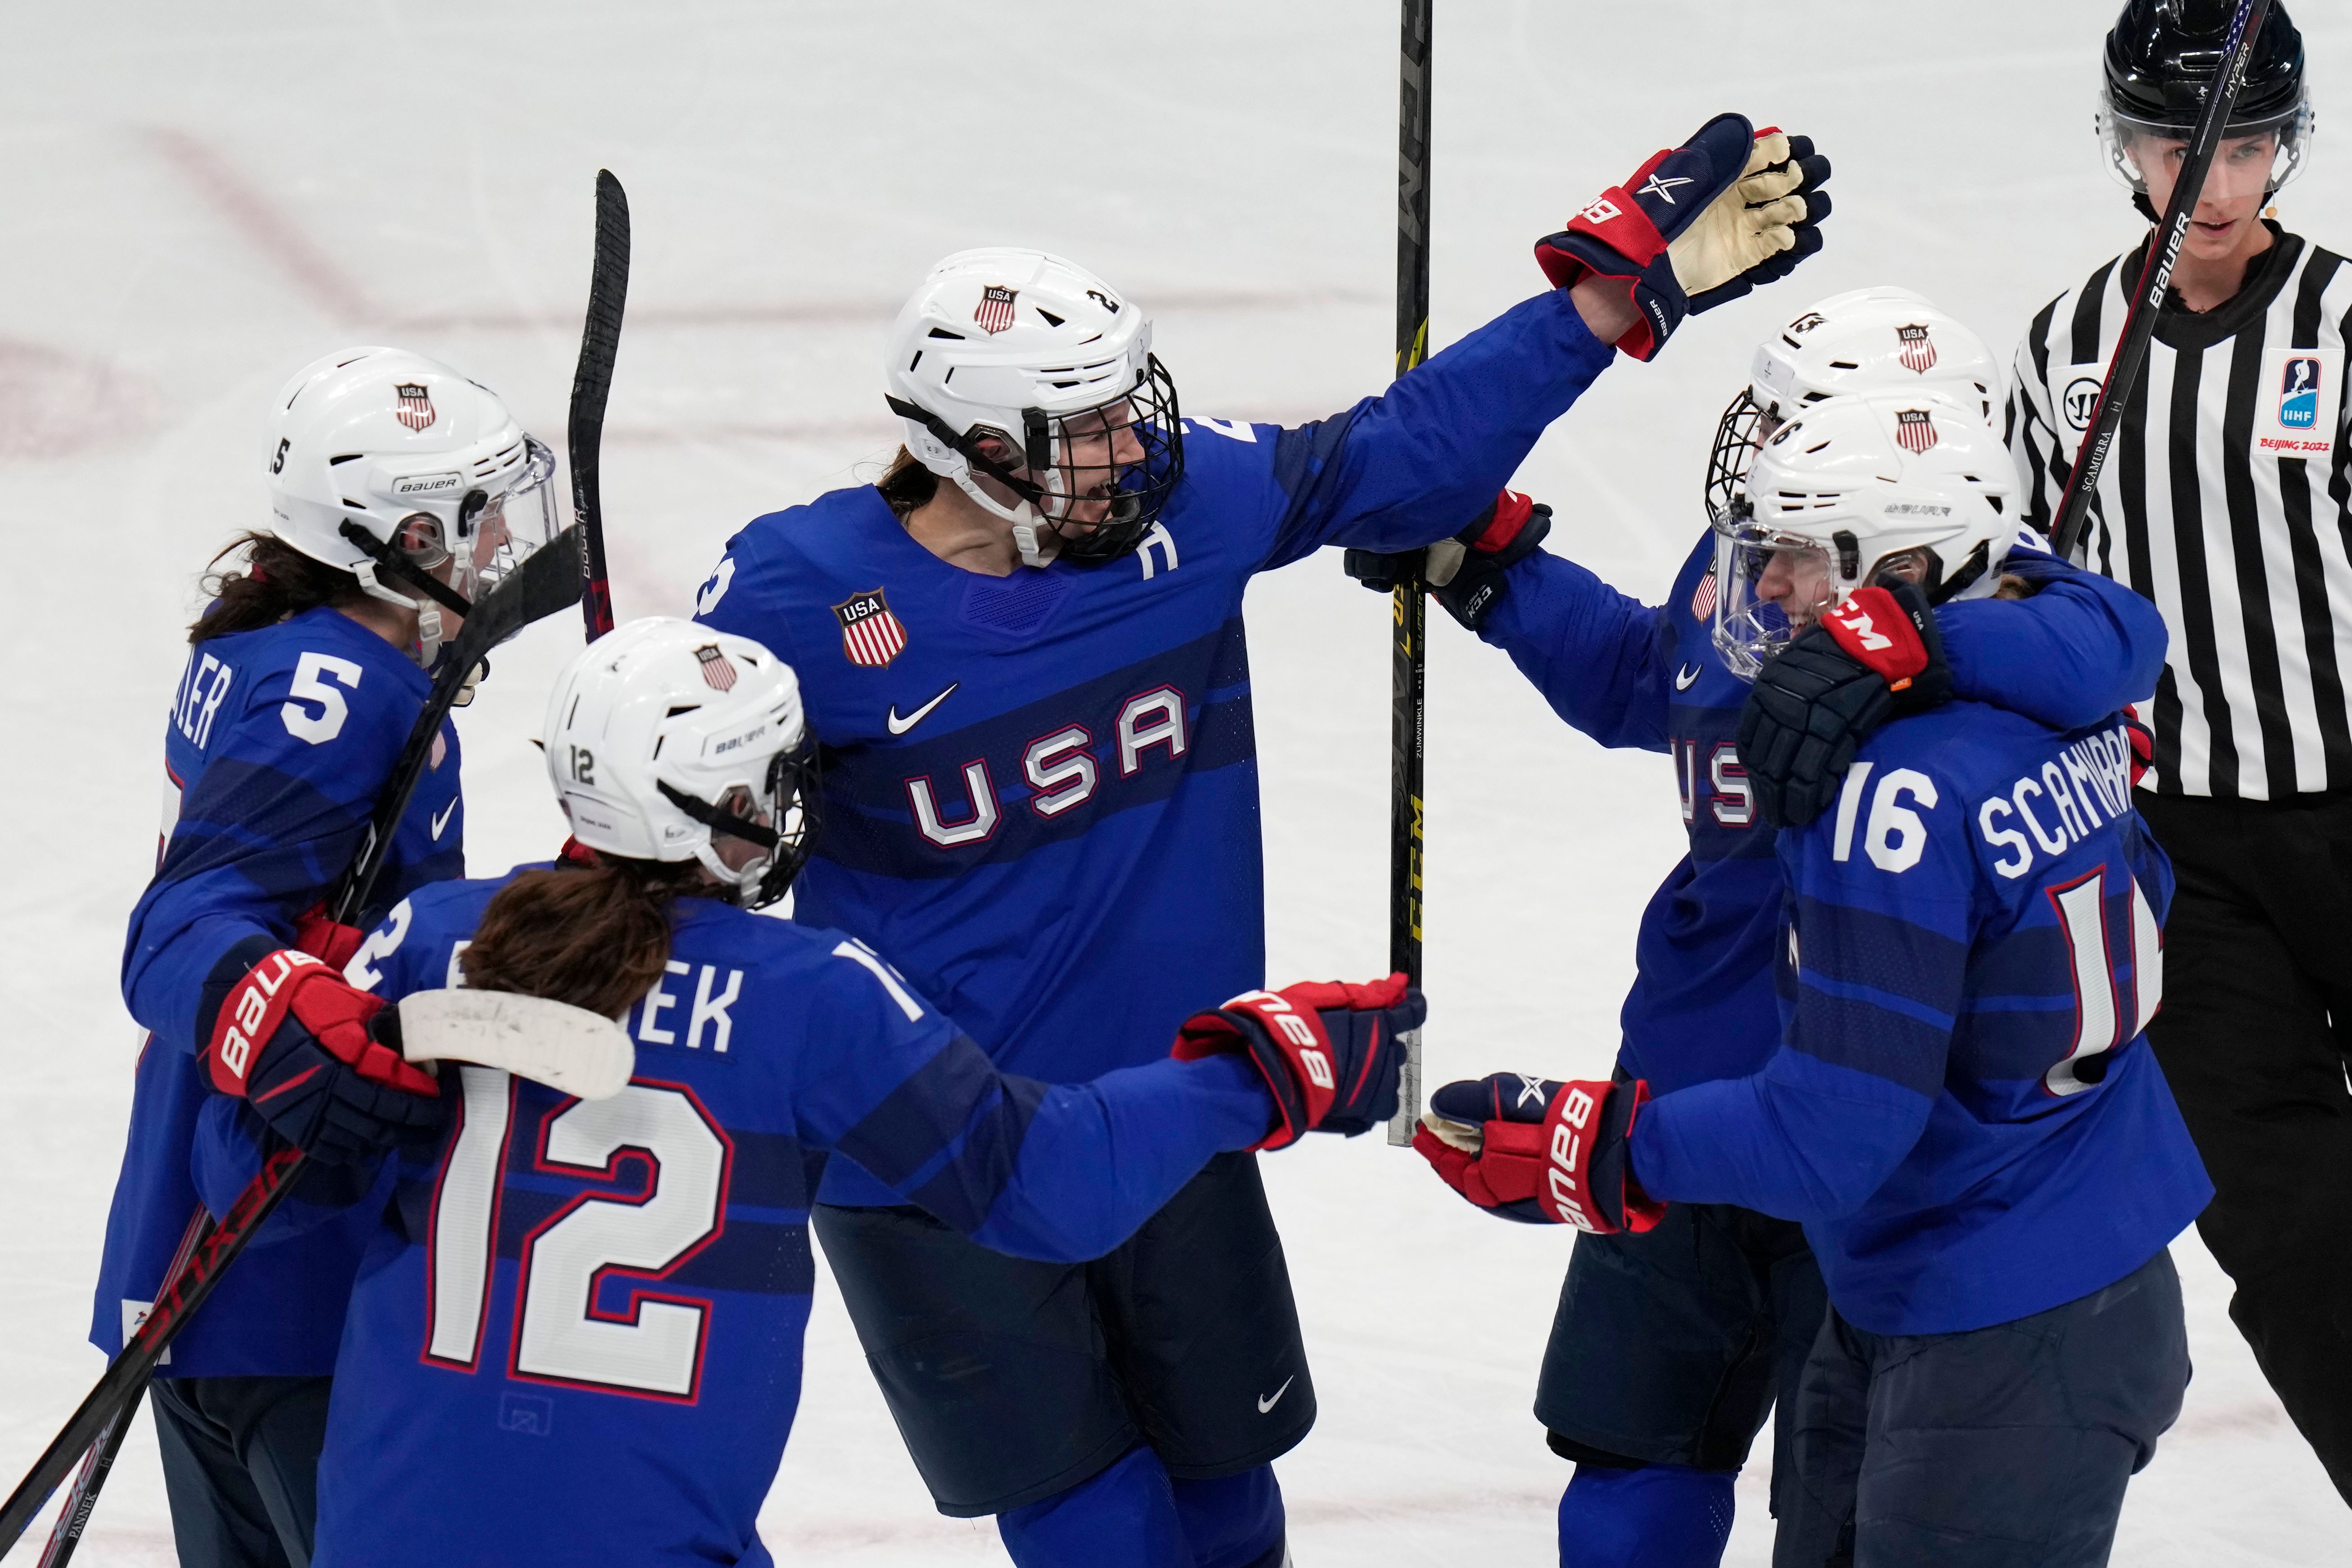 US women survive scare, beat Czechs 4-1 in Olympic hockey The Seattle Times